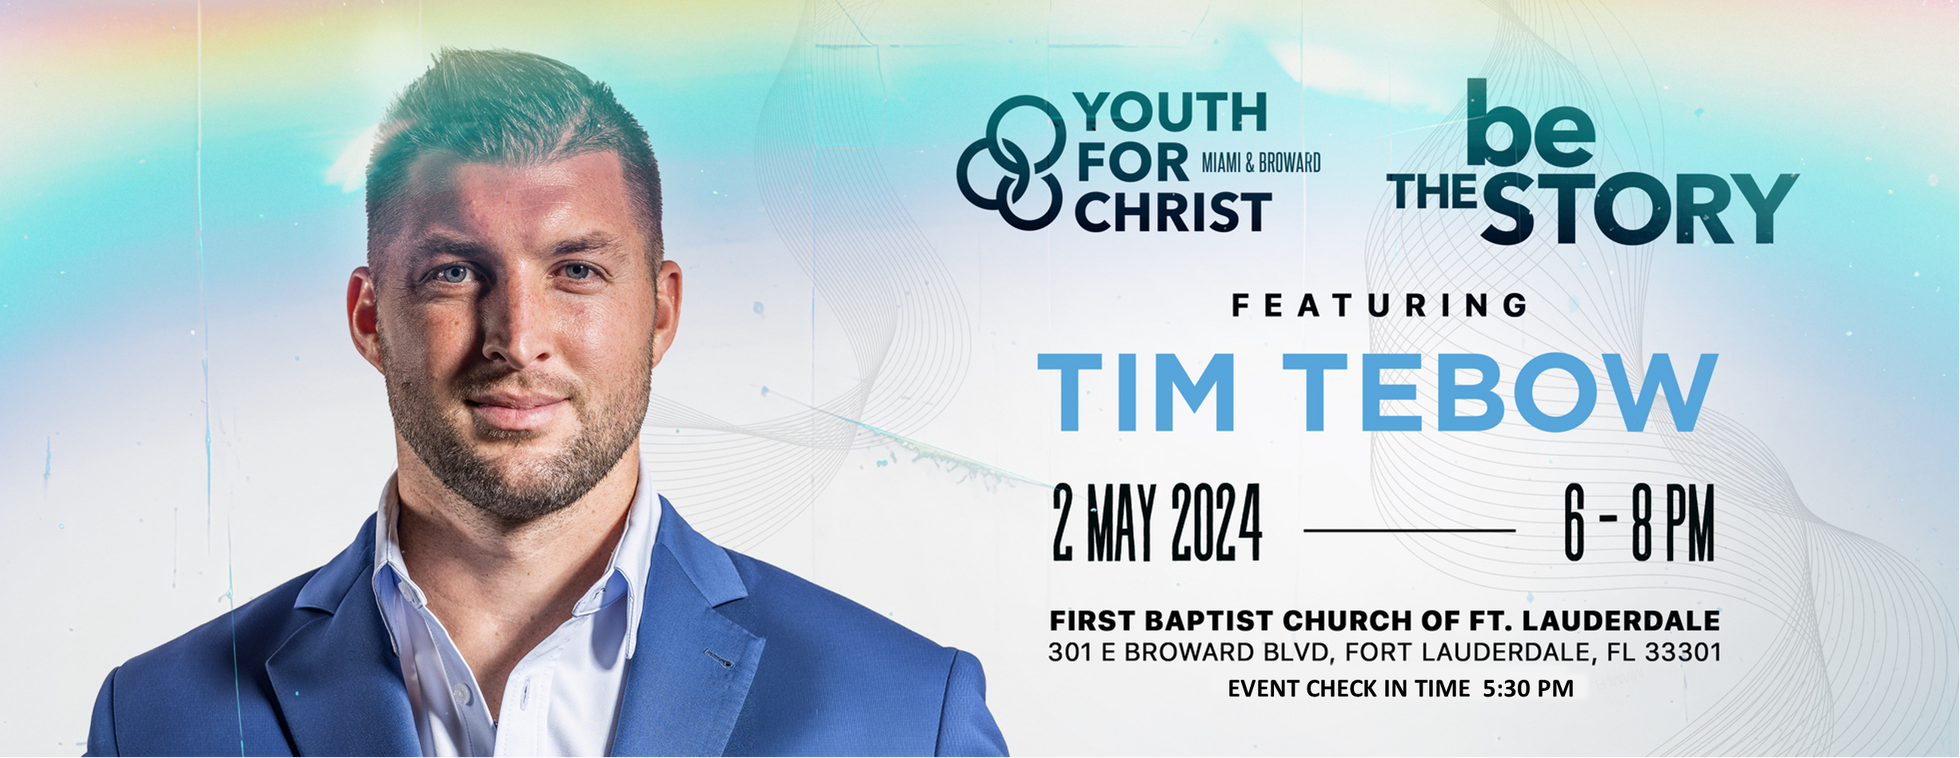 Youth for Christ - Be The Story featuring Tim Tebow